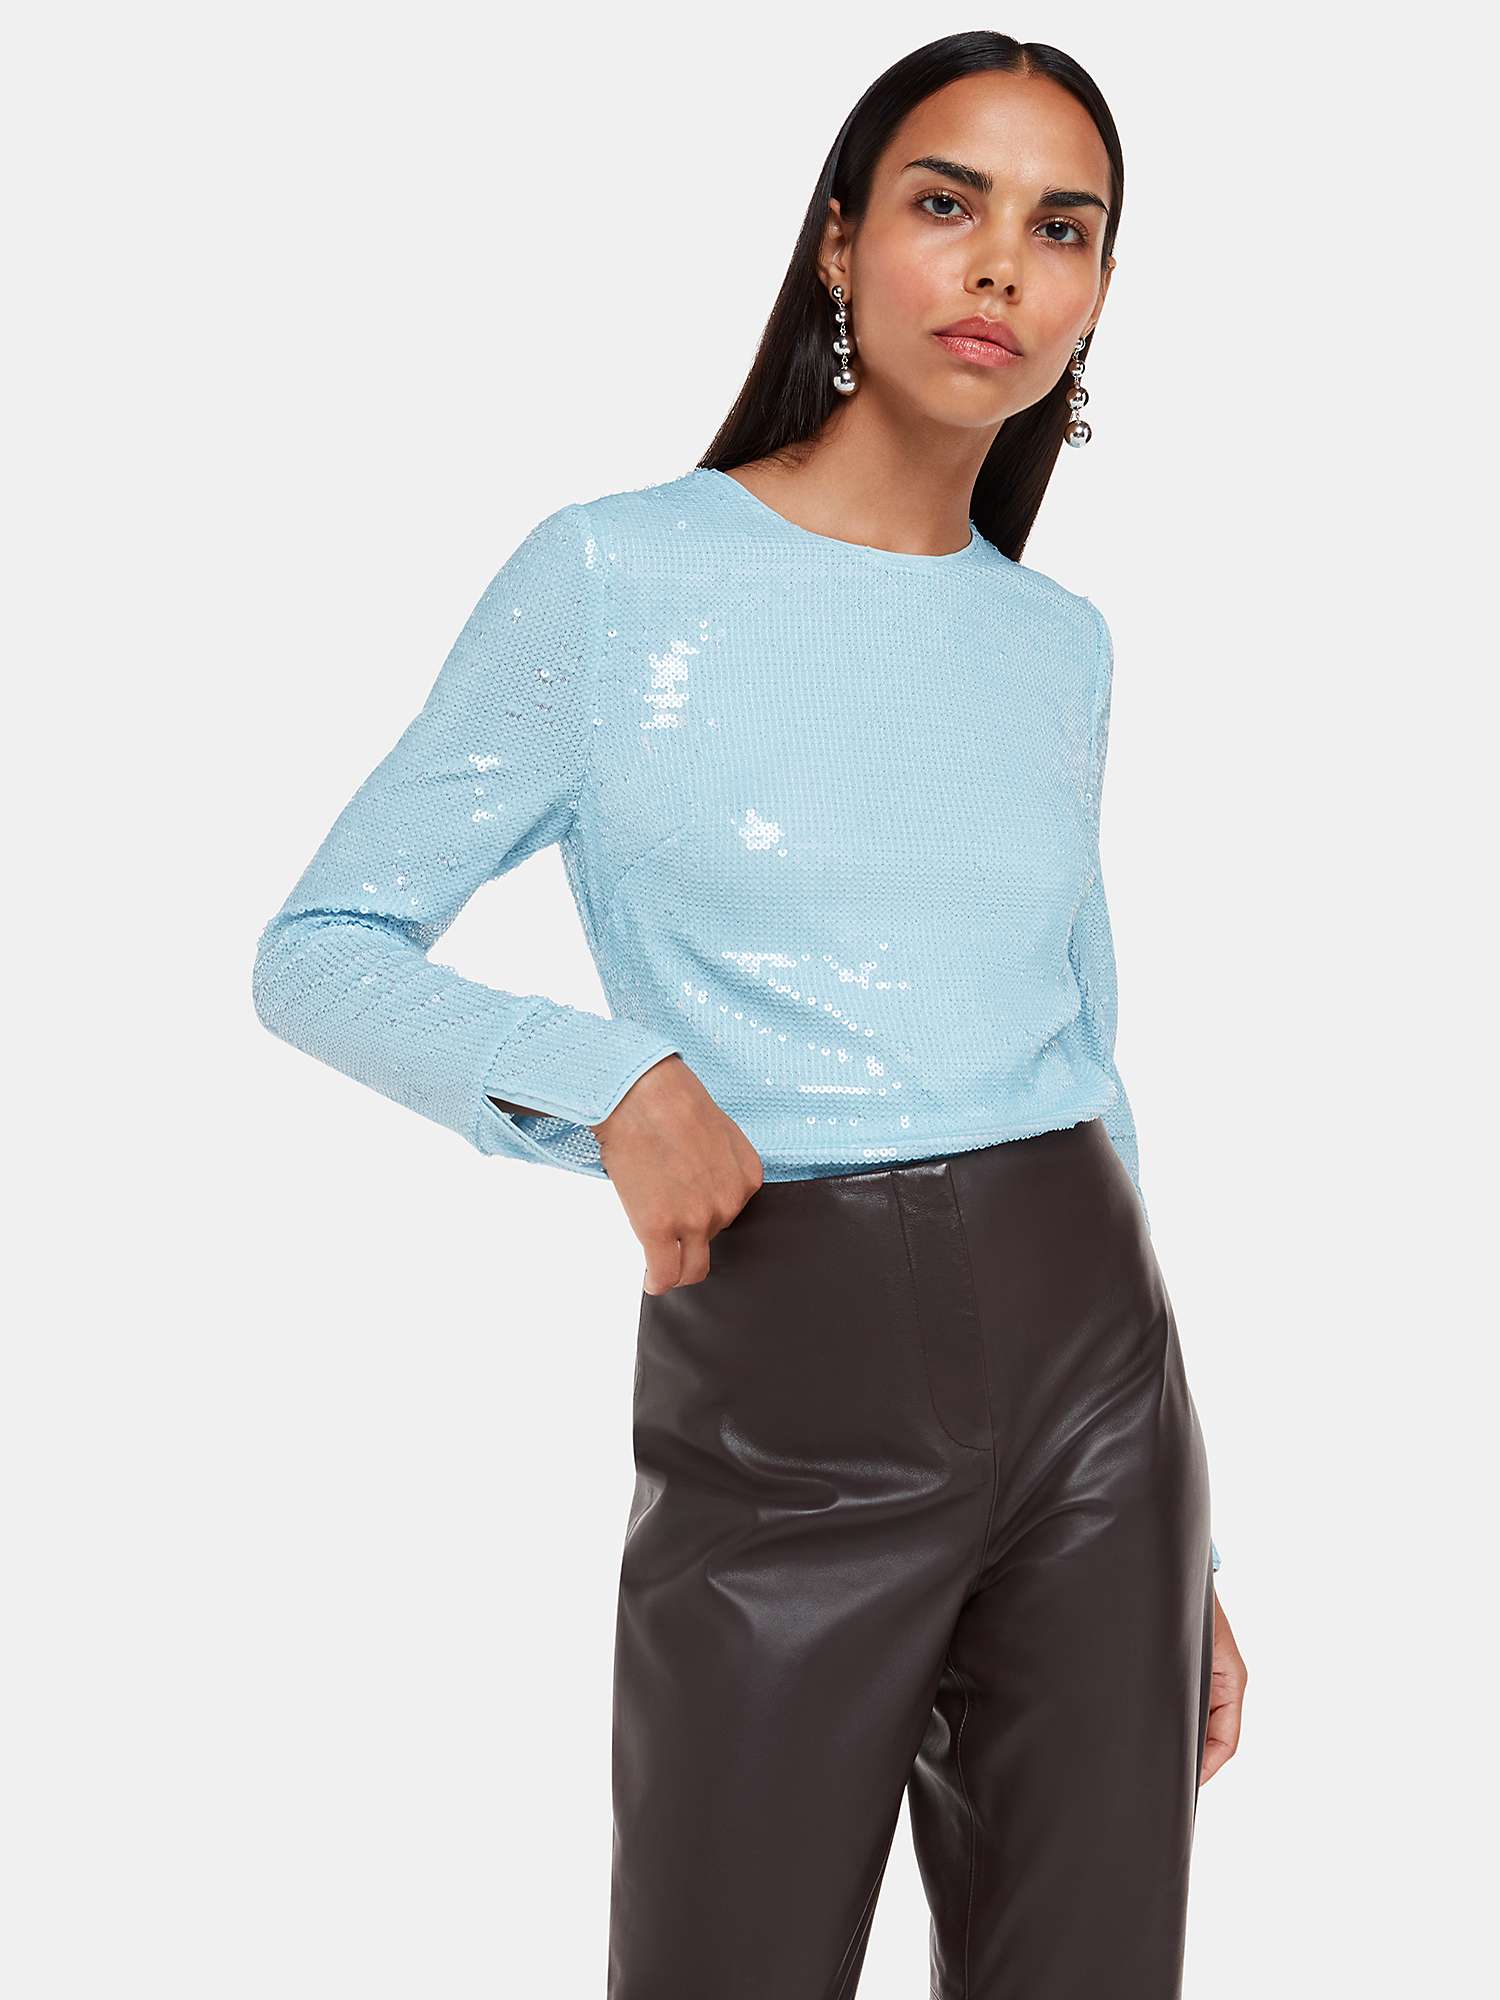 Whistles Minimal Sequin Top, Pale Blue at John Lewis & Partners